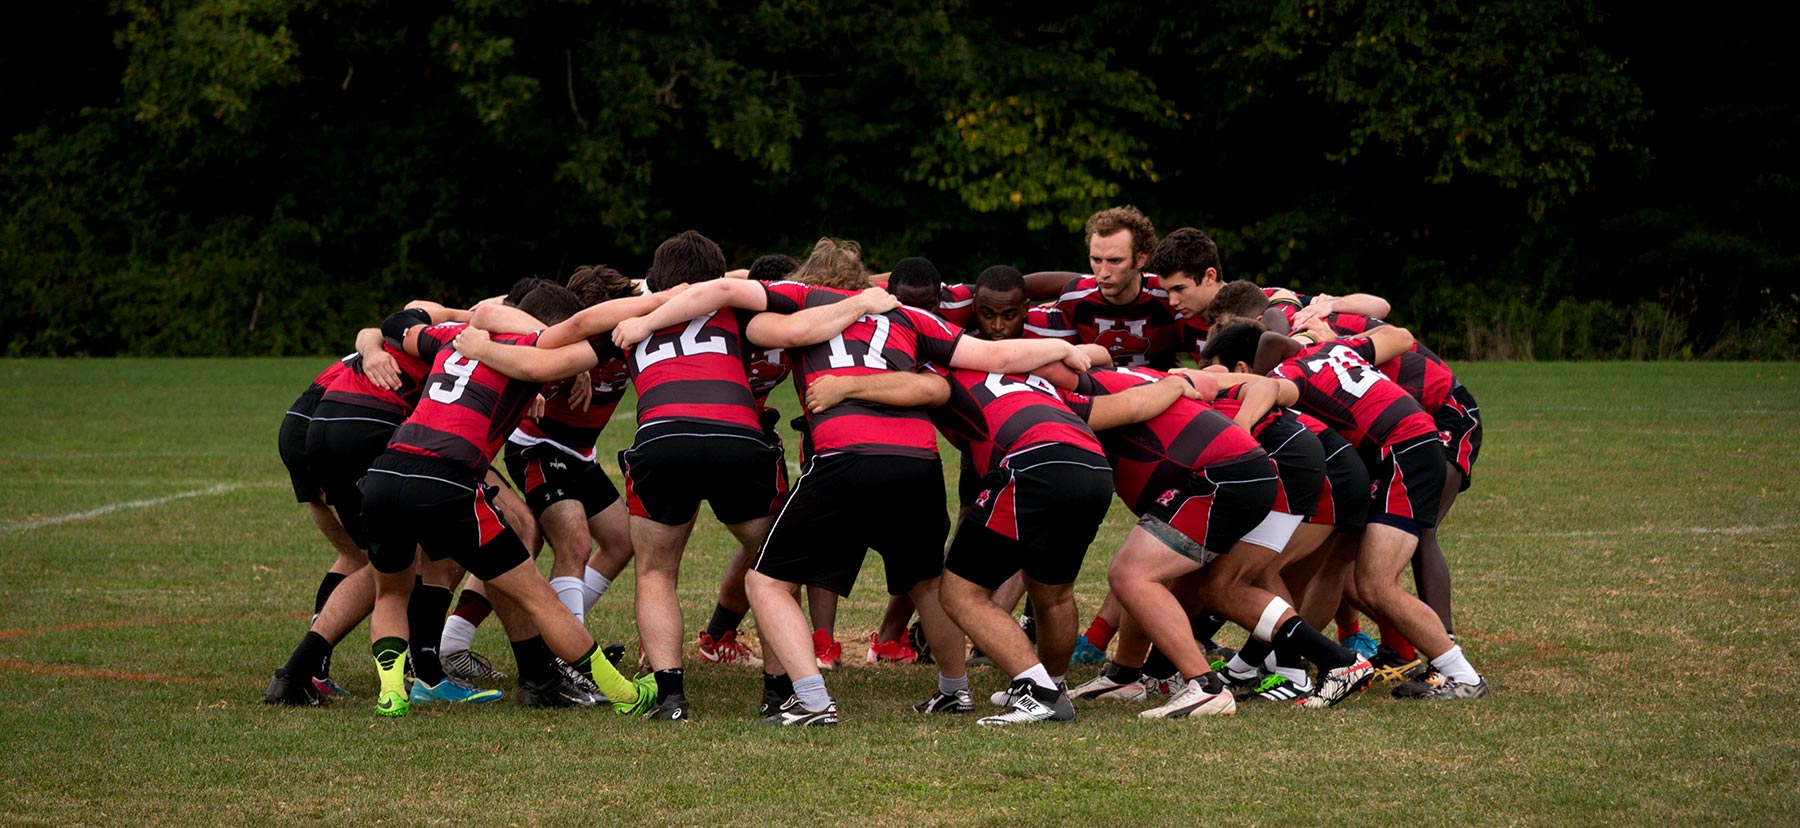 The Rugby team in a huddle.